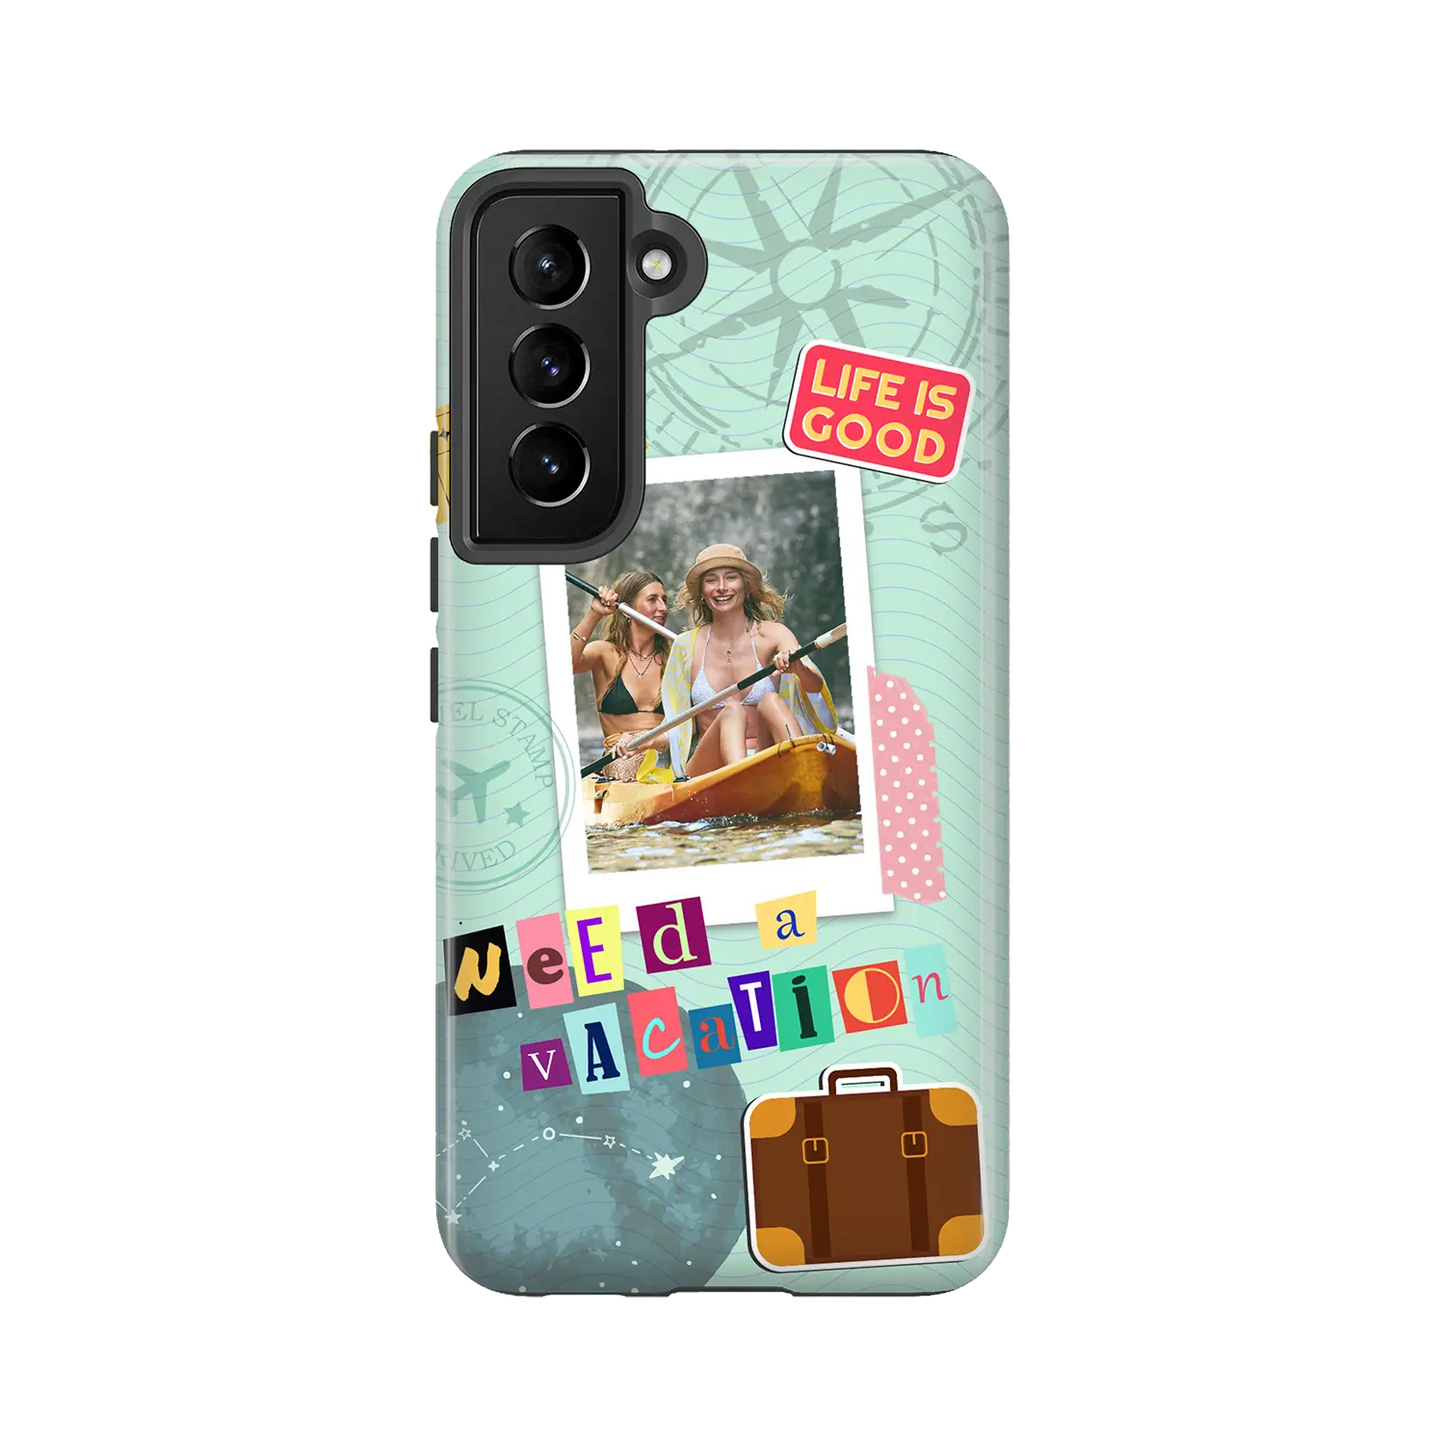 Need A Vacation - Personalised Galaxy S Case